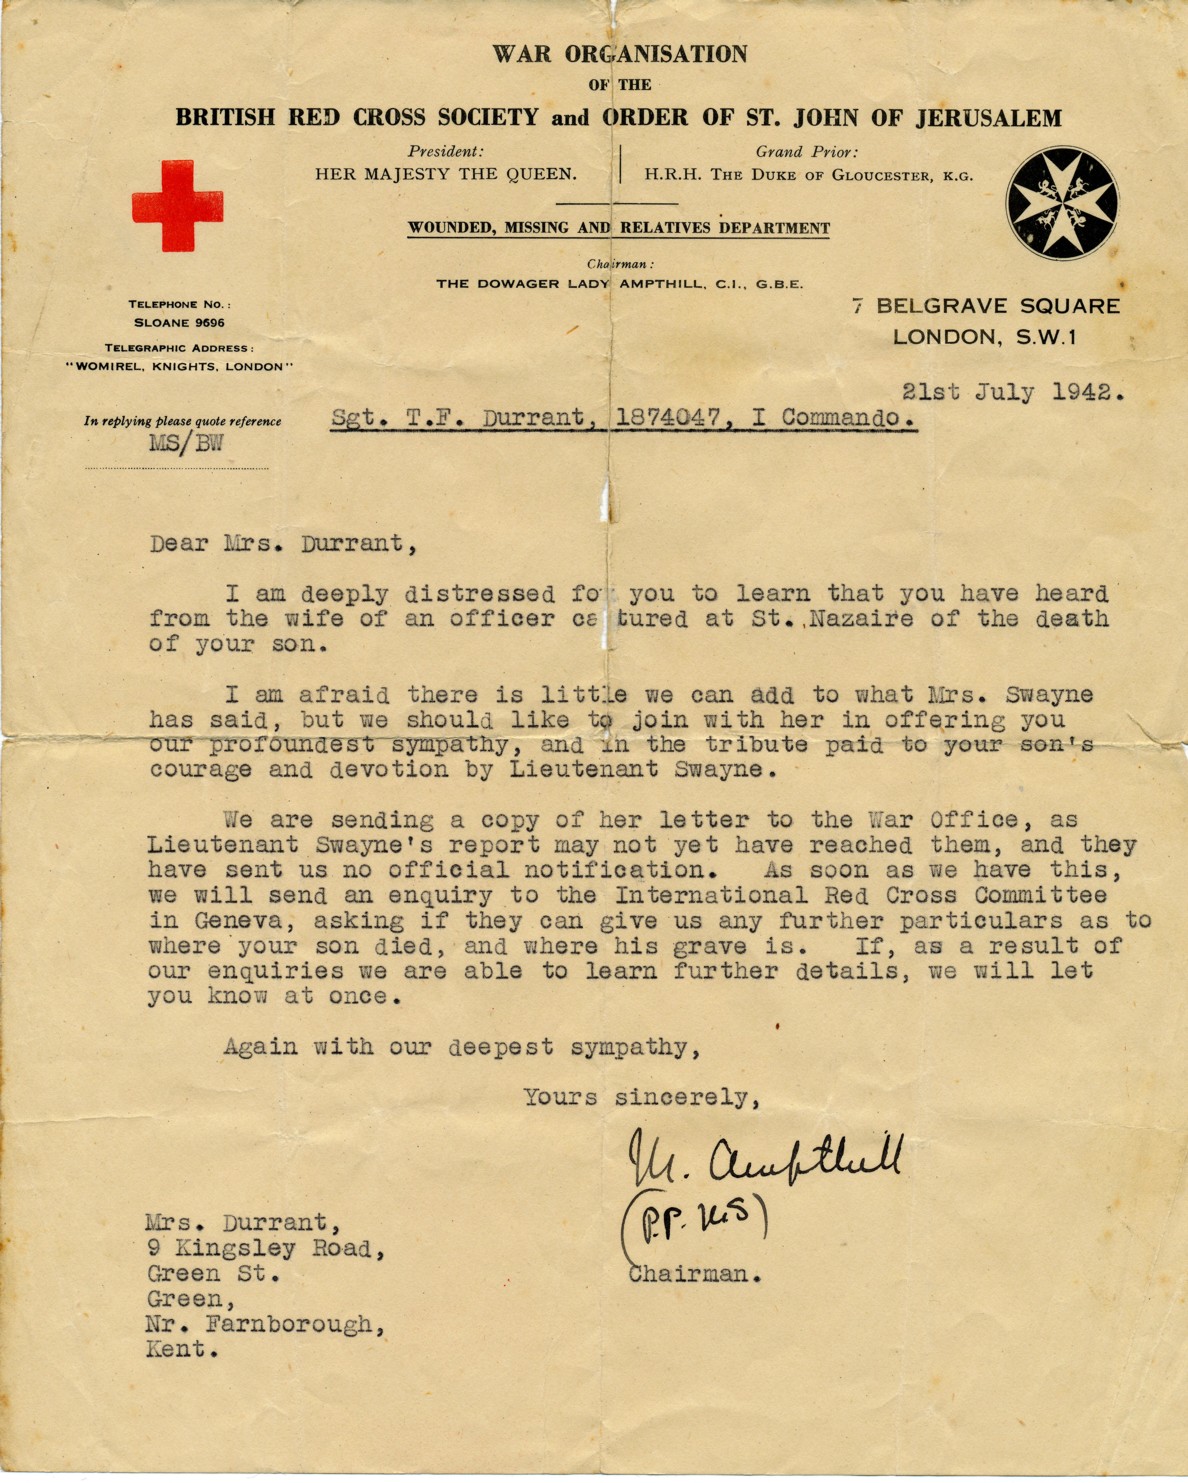 British Red Cross letter dated 21st July 1942